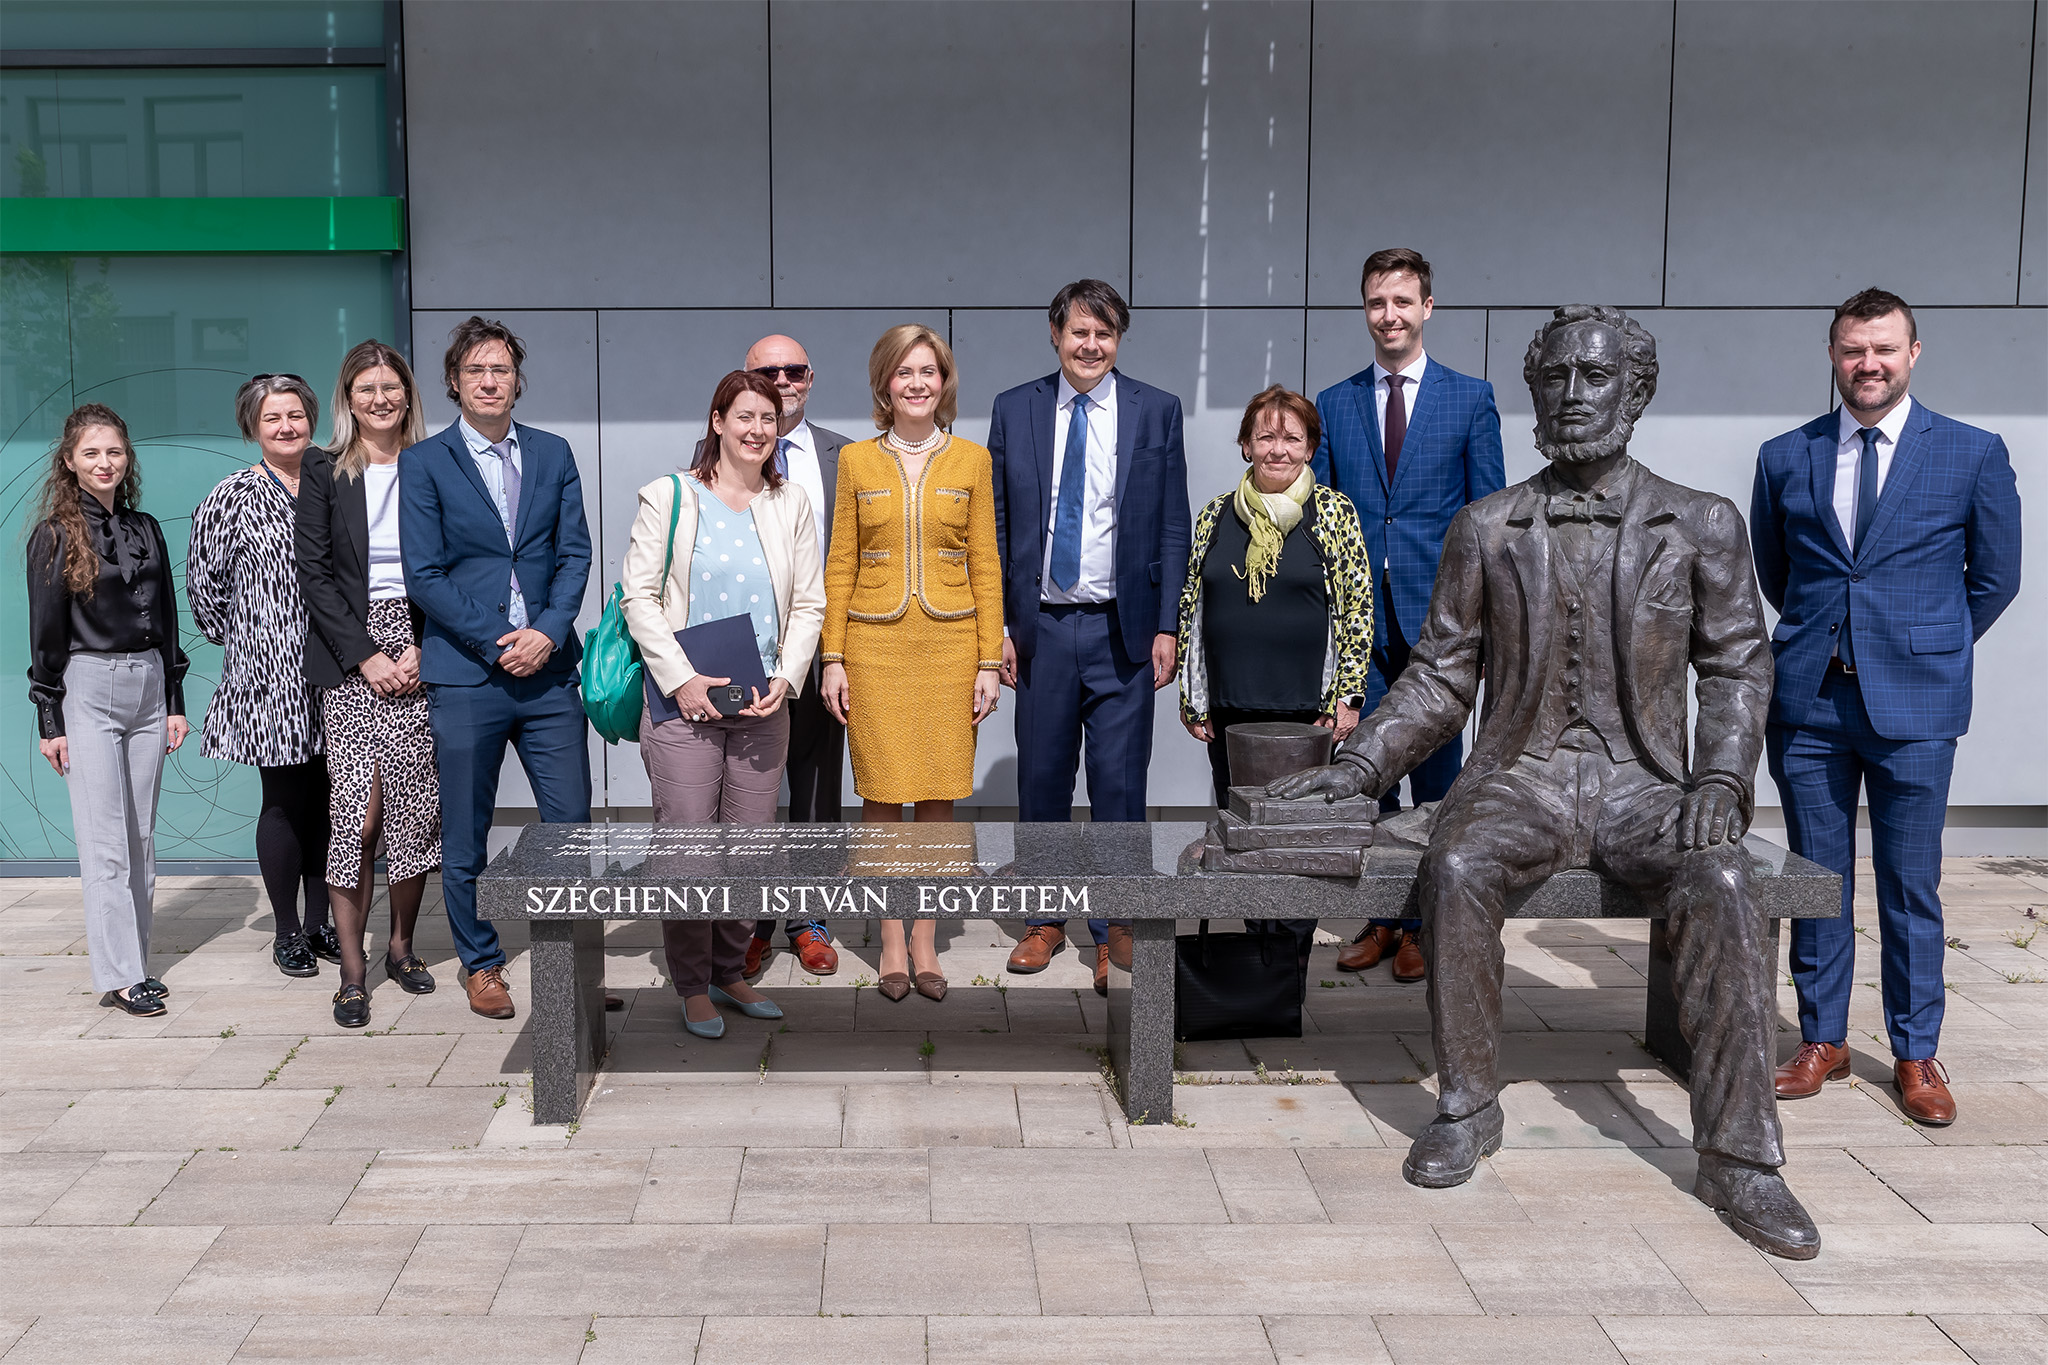 Employees of the Embassy of the United States in Budapest and Széchenyi István University with Dr Glenn Tiffert at the statue of Széchenyi István on the Győr campus. 